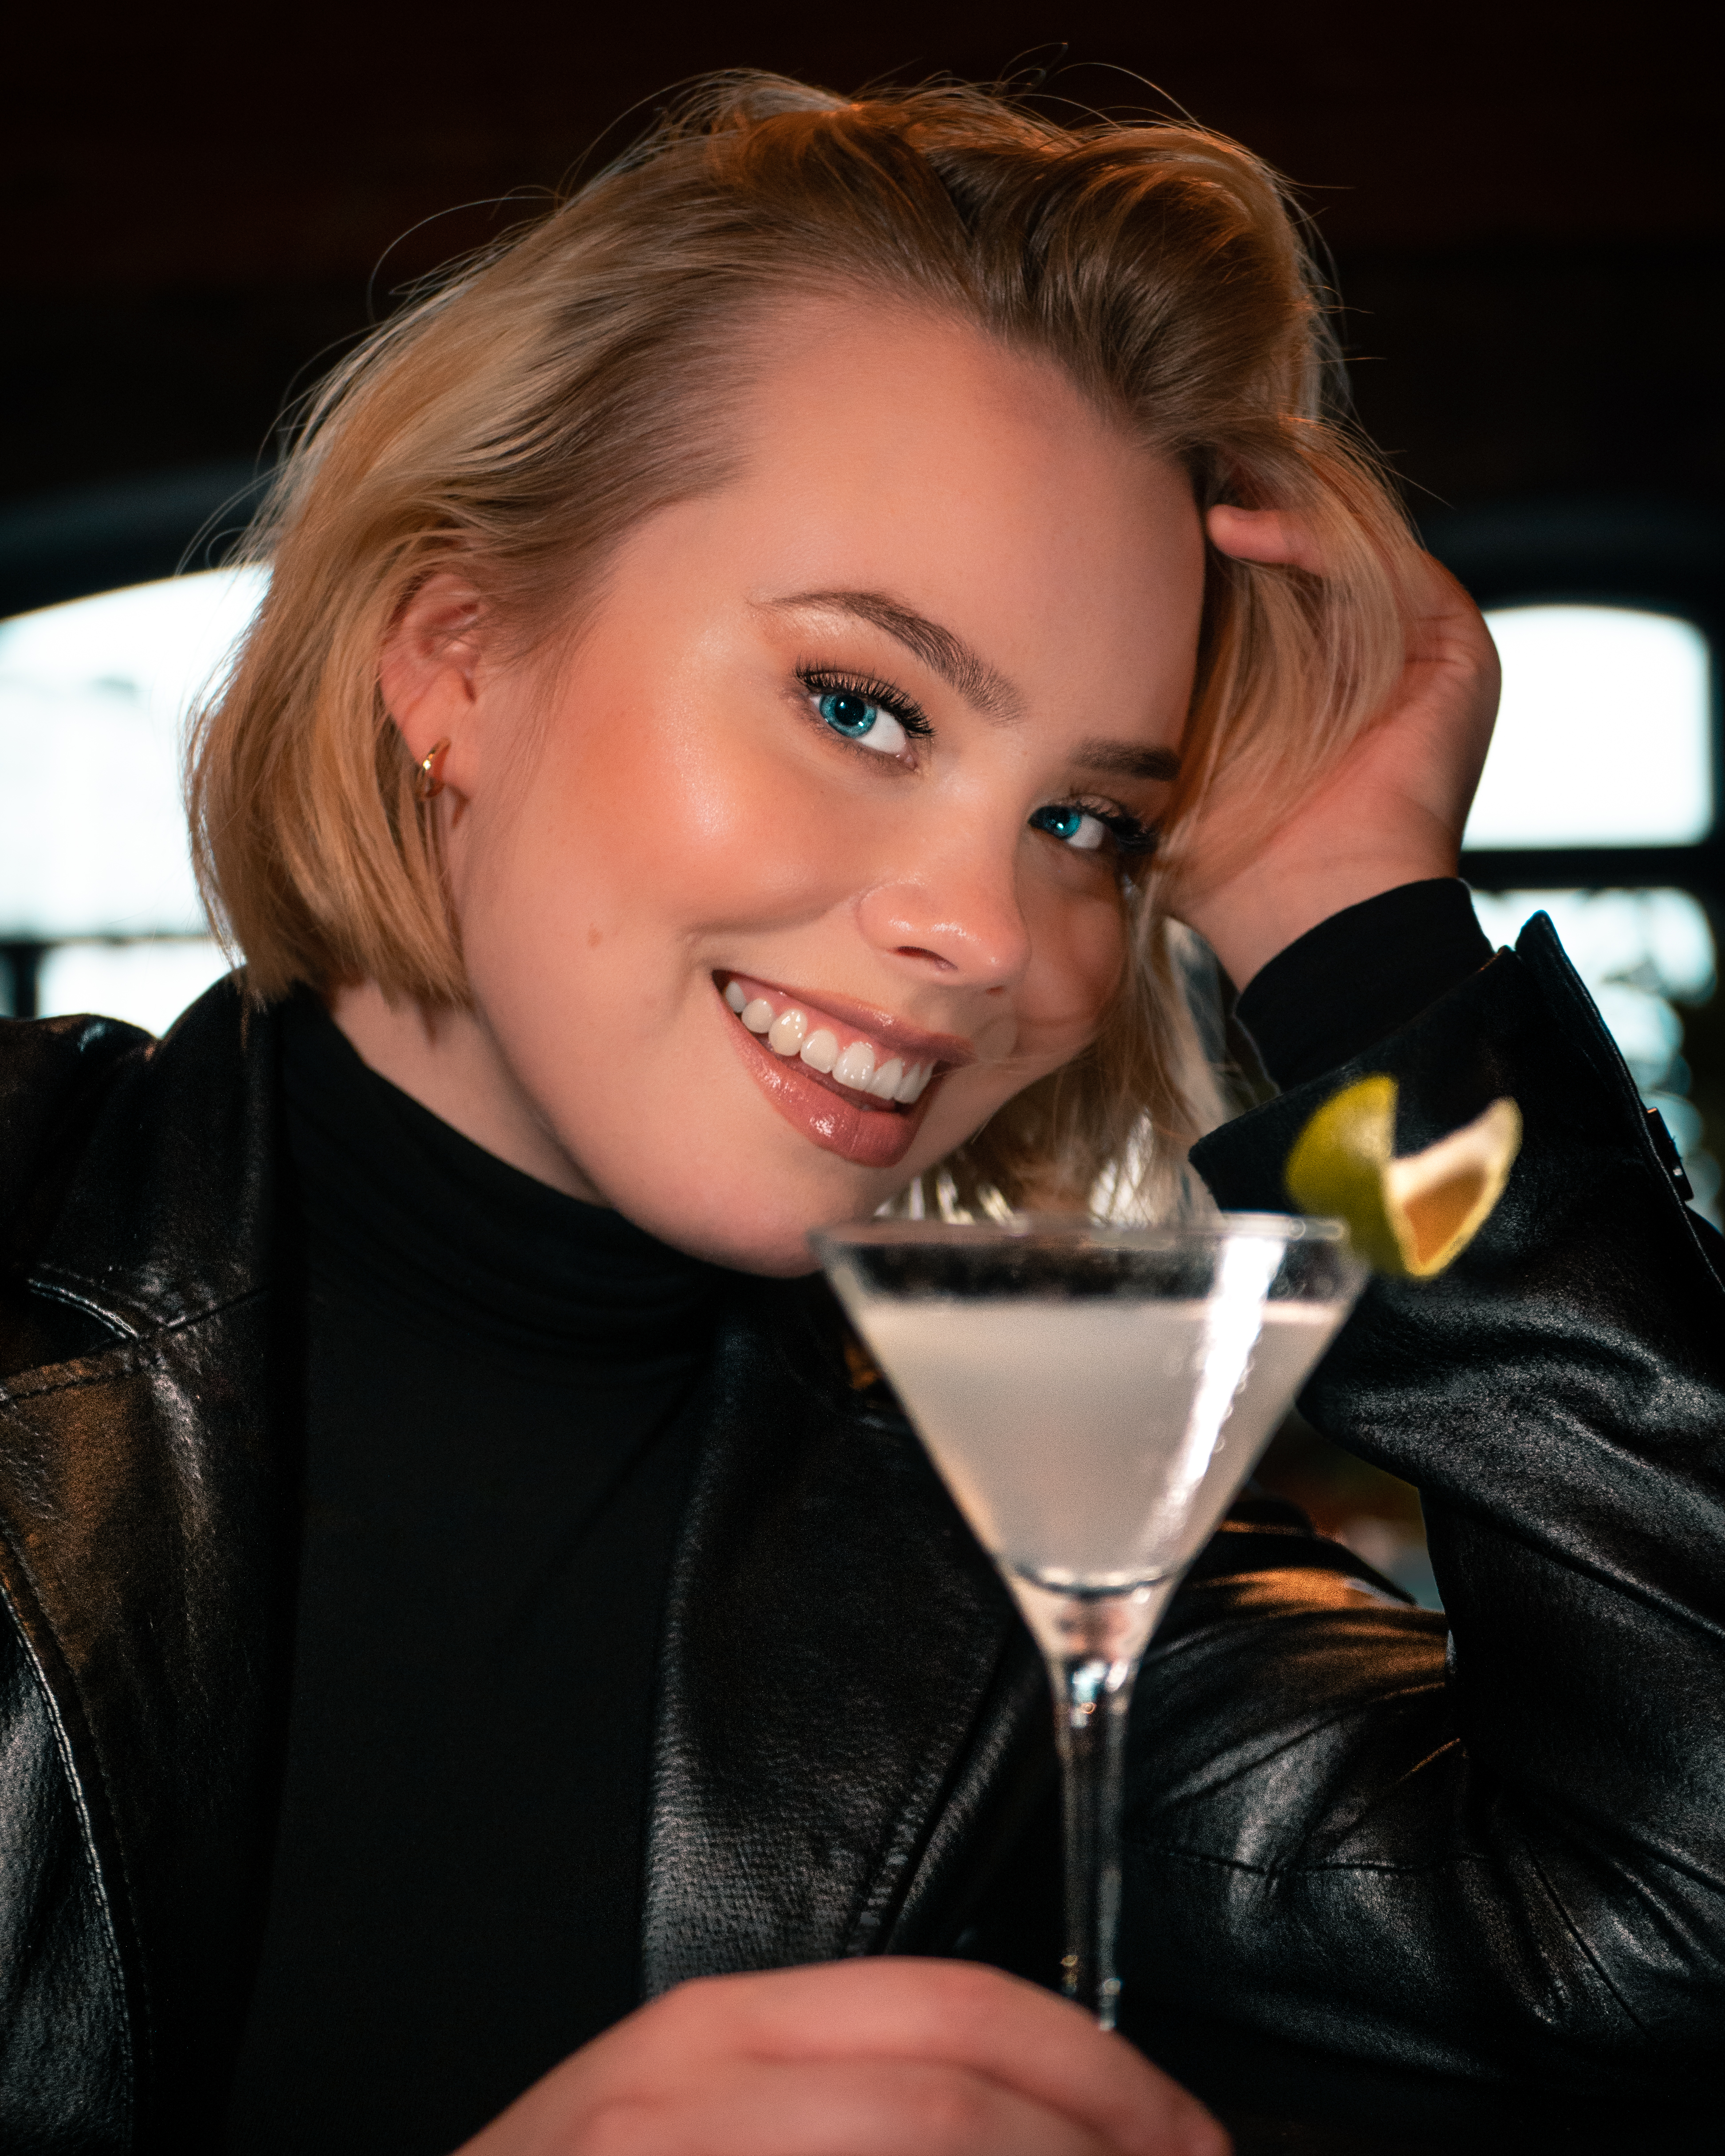 Blonde woman with blue eyes is holding a drink and smiling at the camera. She is wearing a black leather jacket.